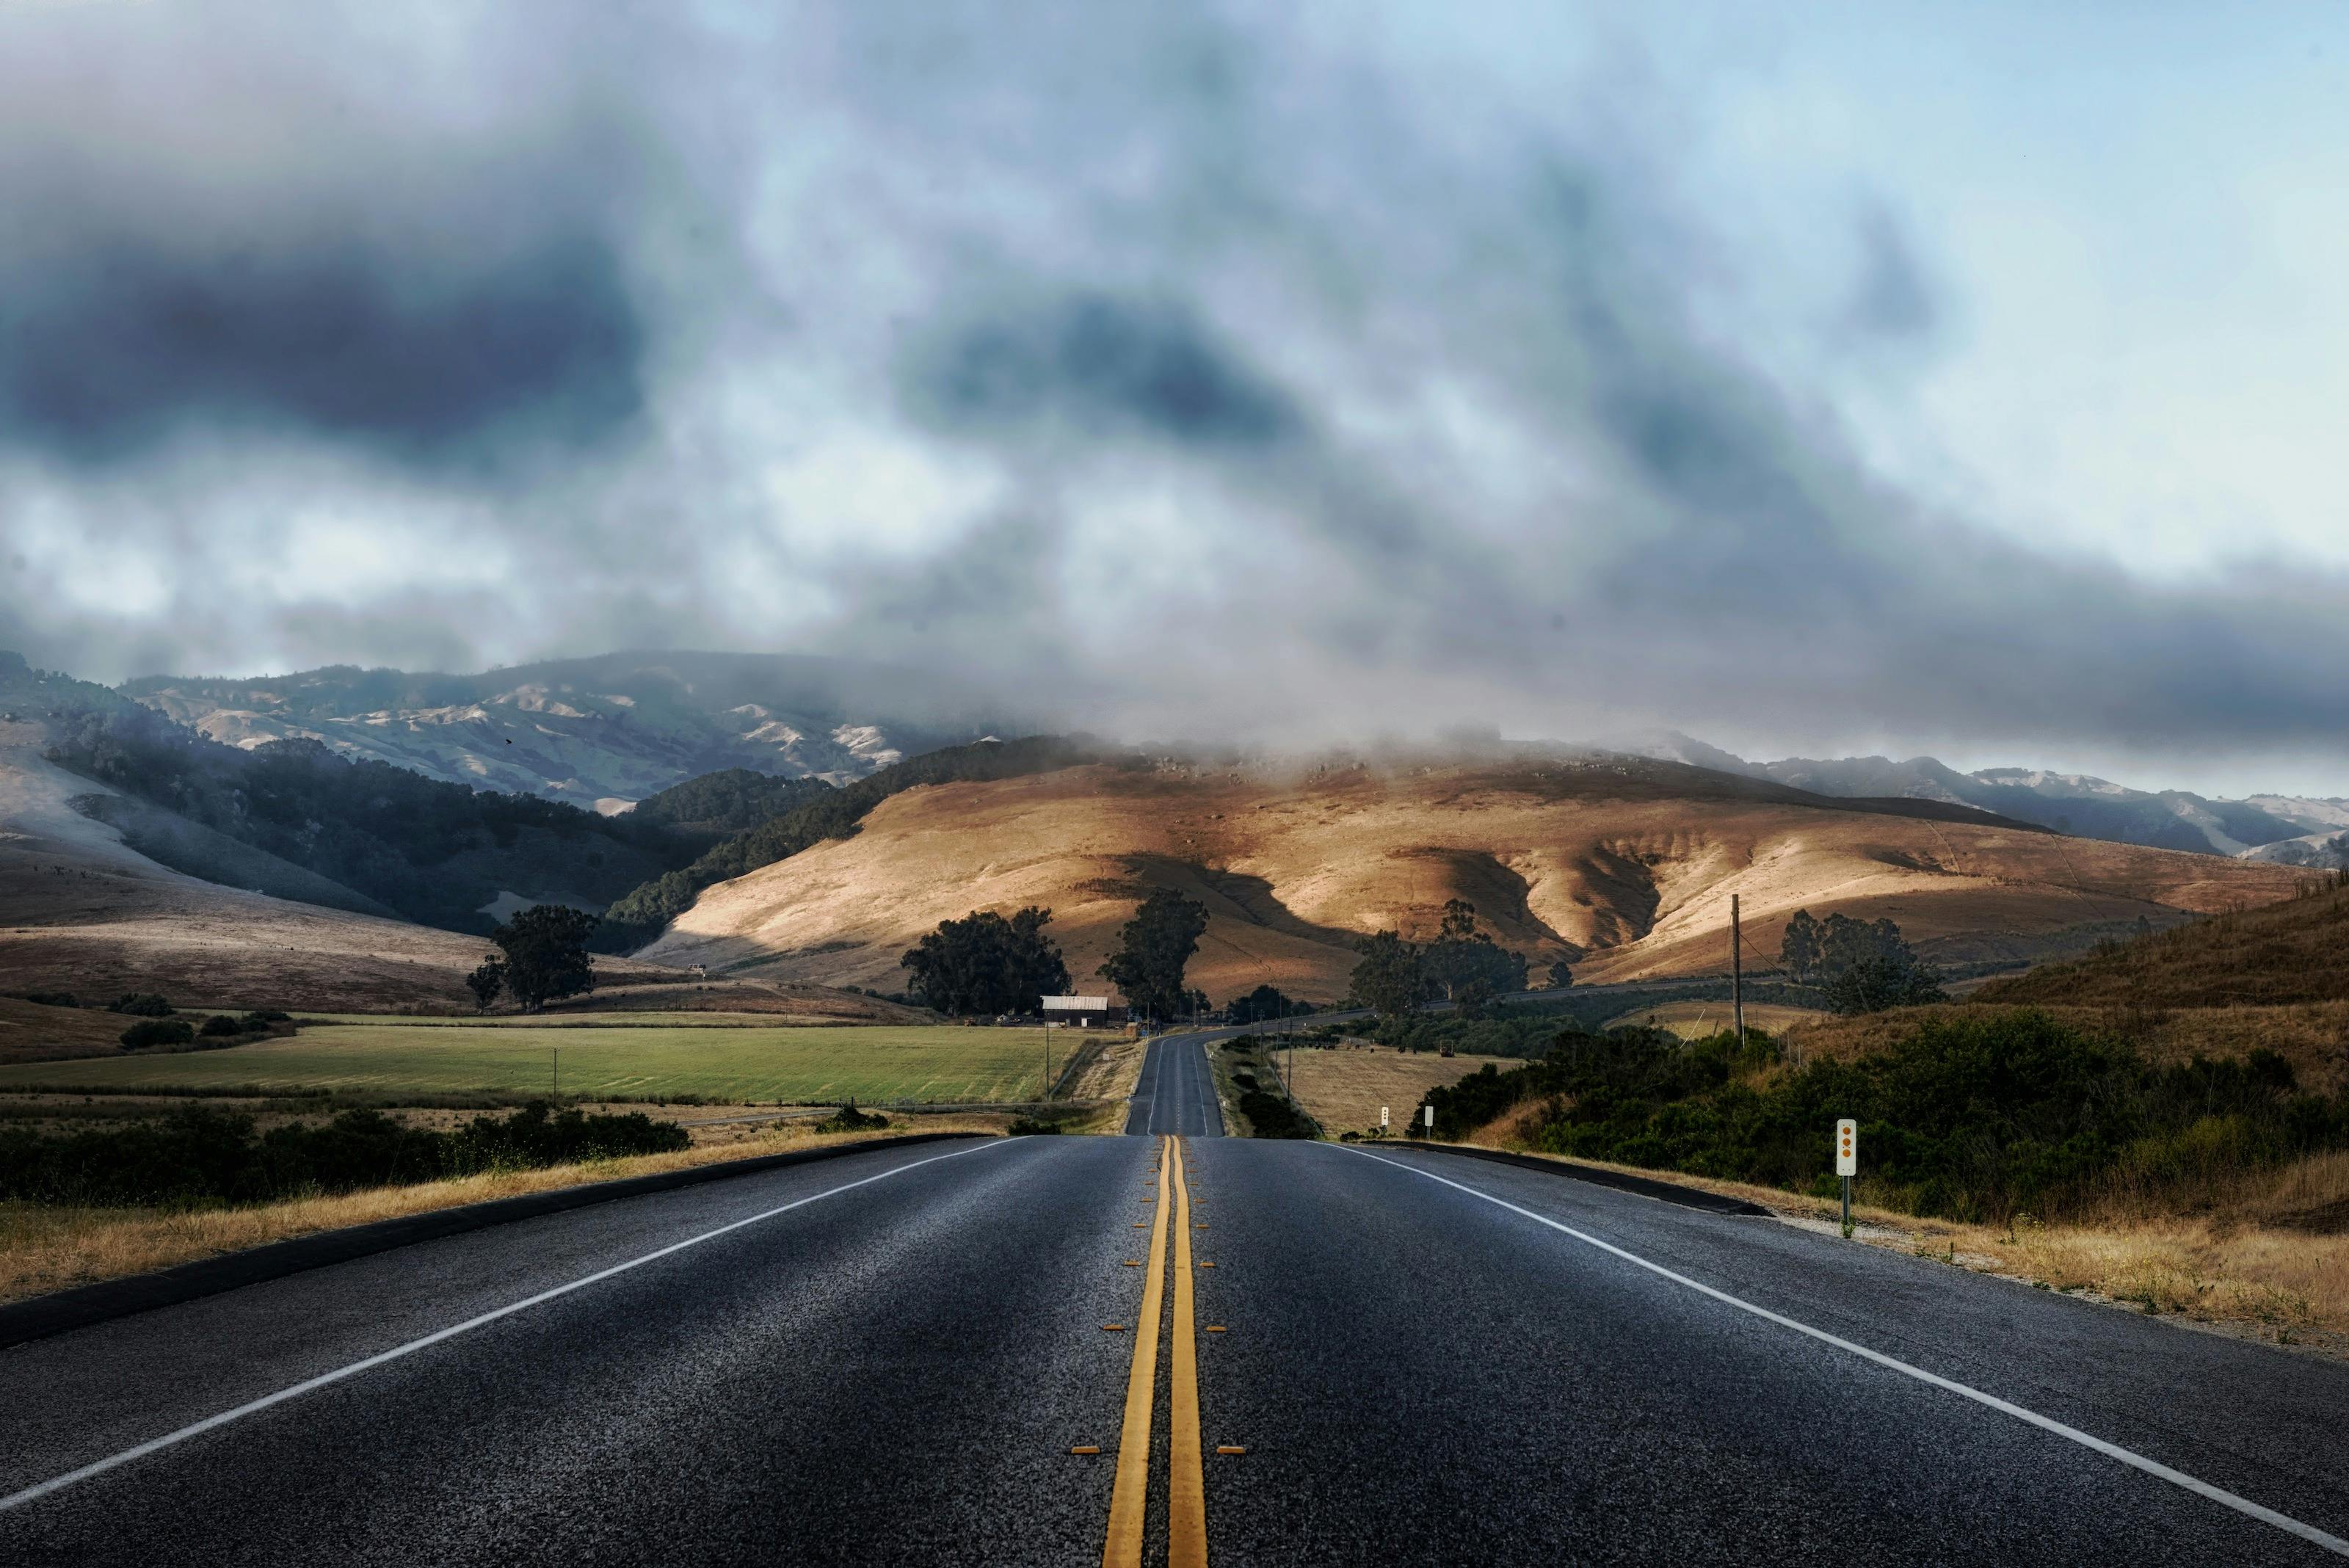 Road Images Pexels Free Stock Photos